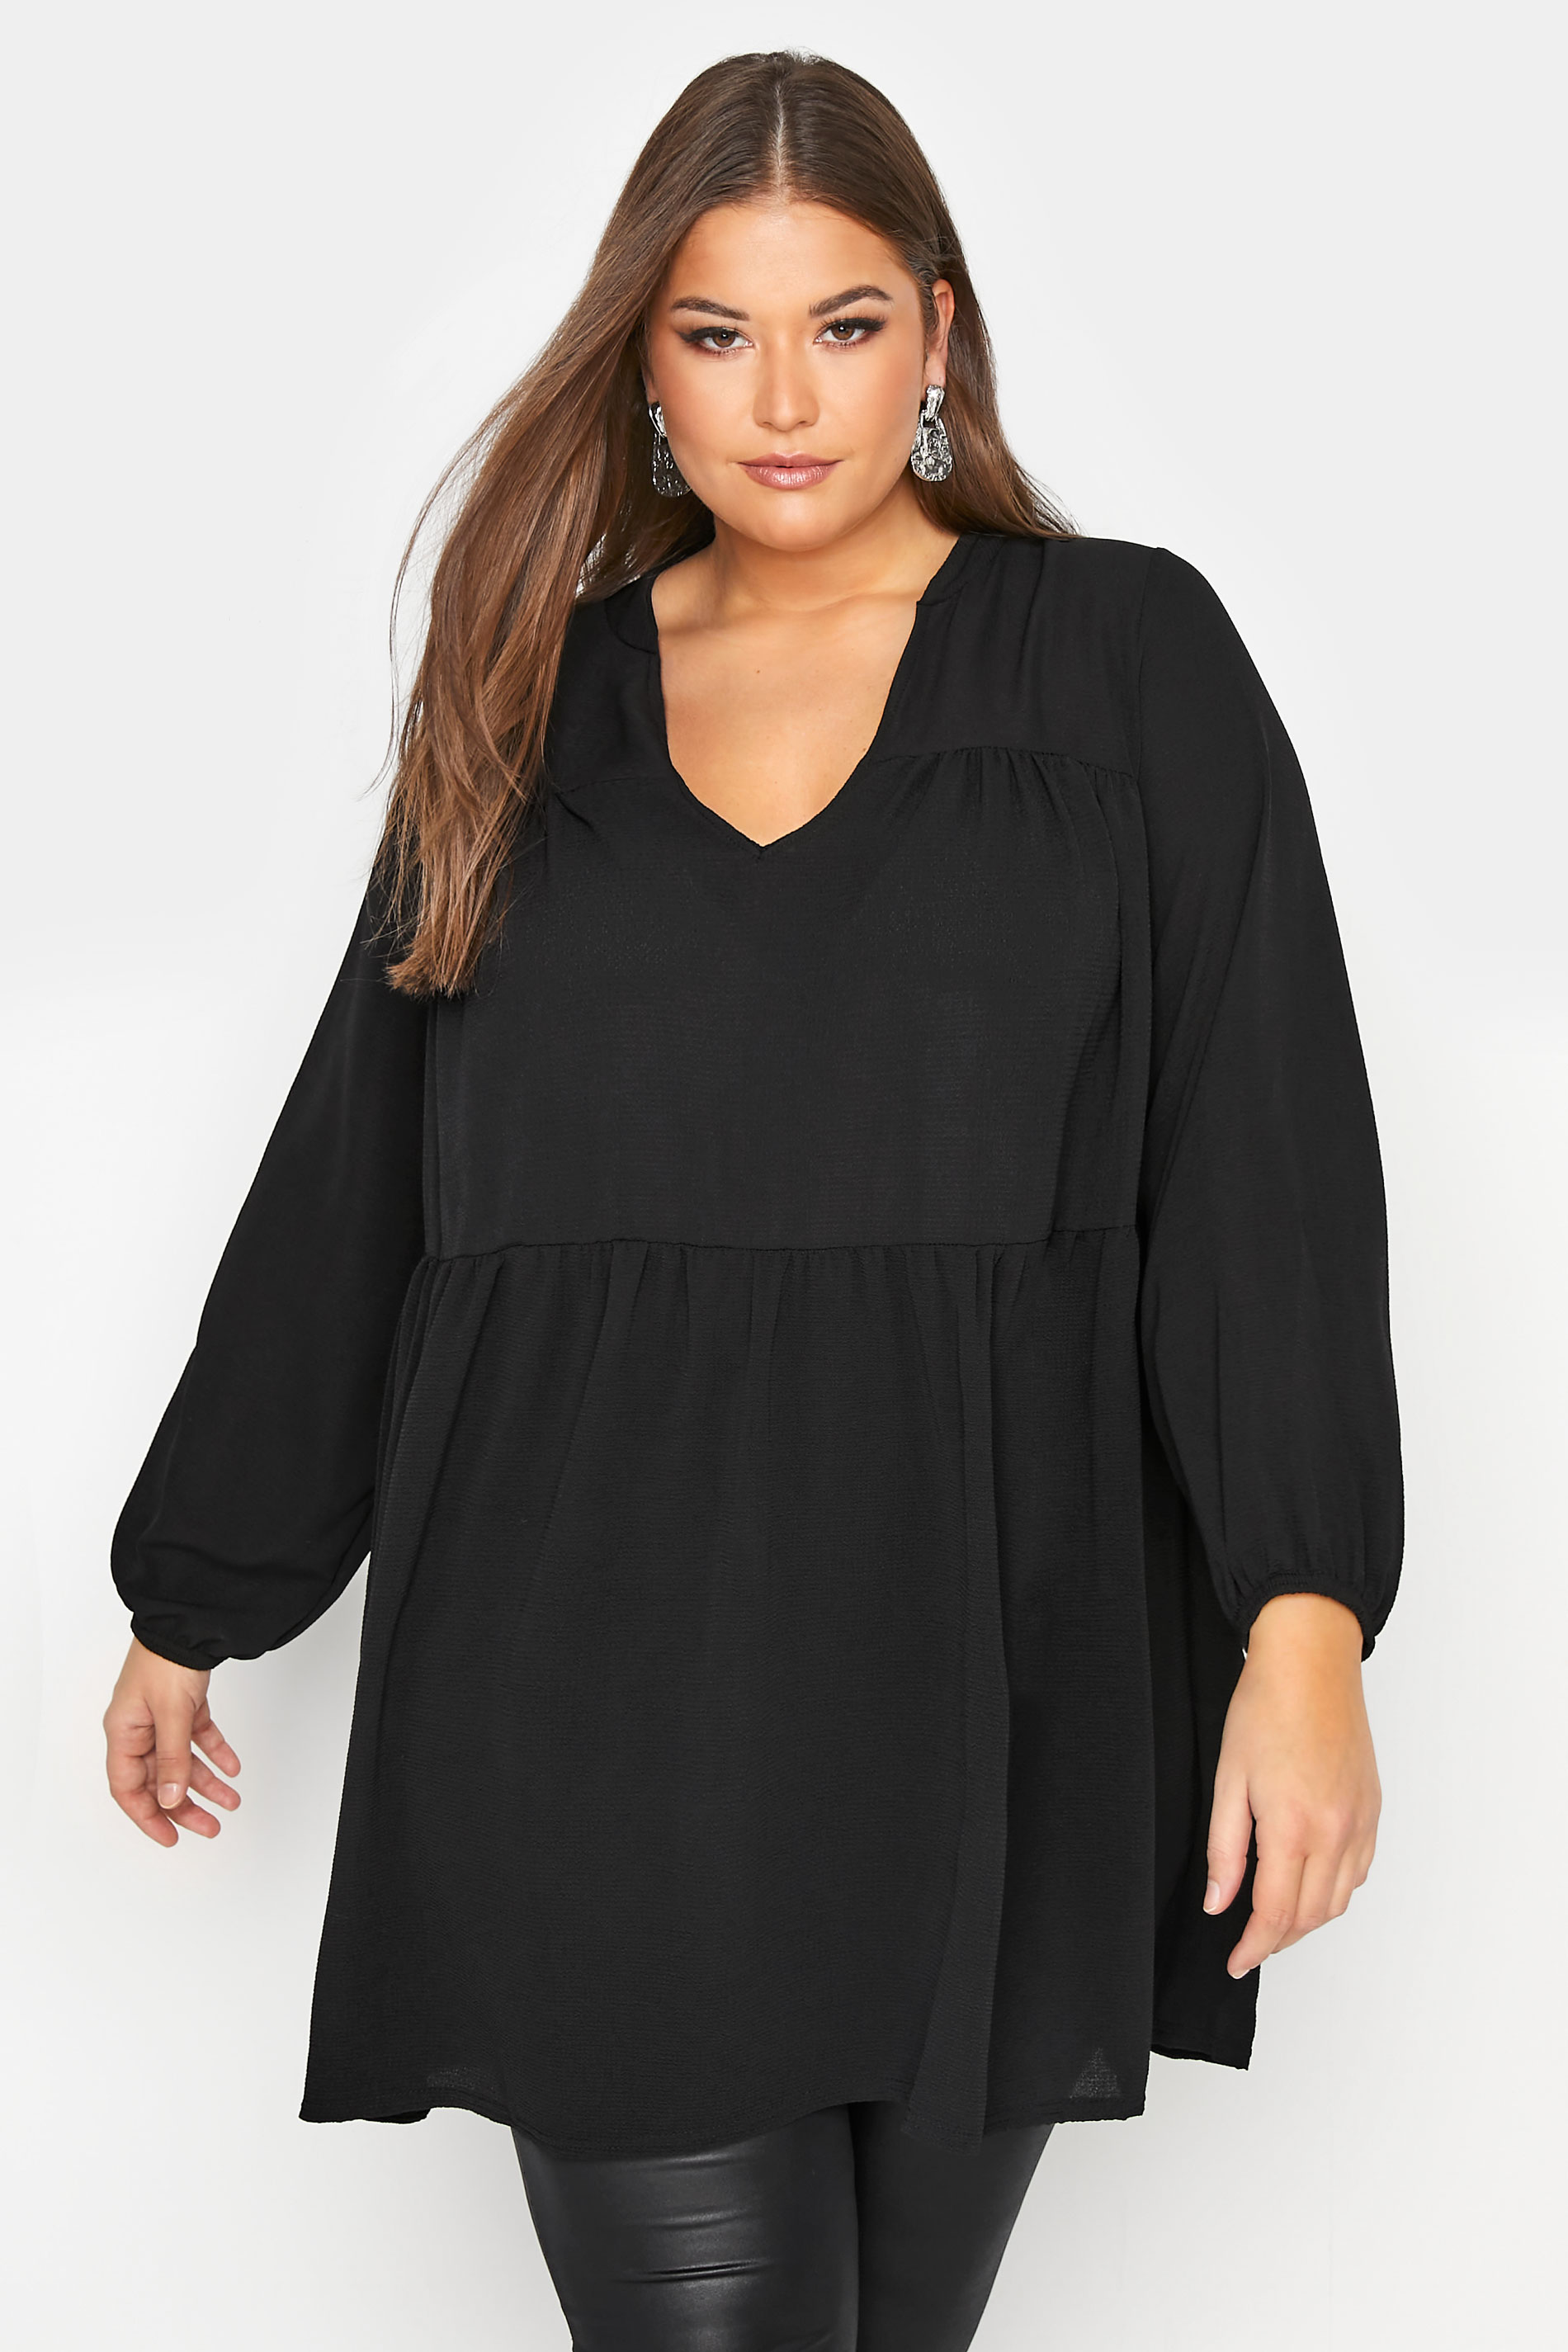 YOURS LONDON Black Smock Top_A.jpg